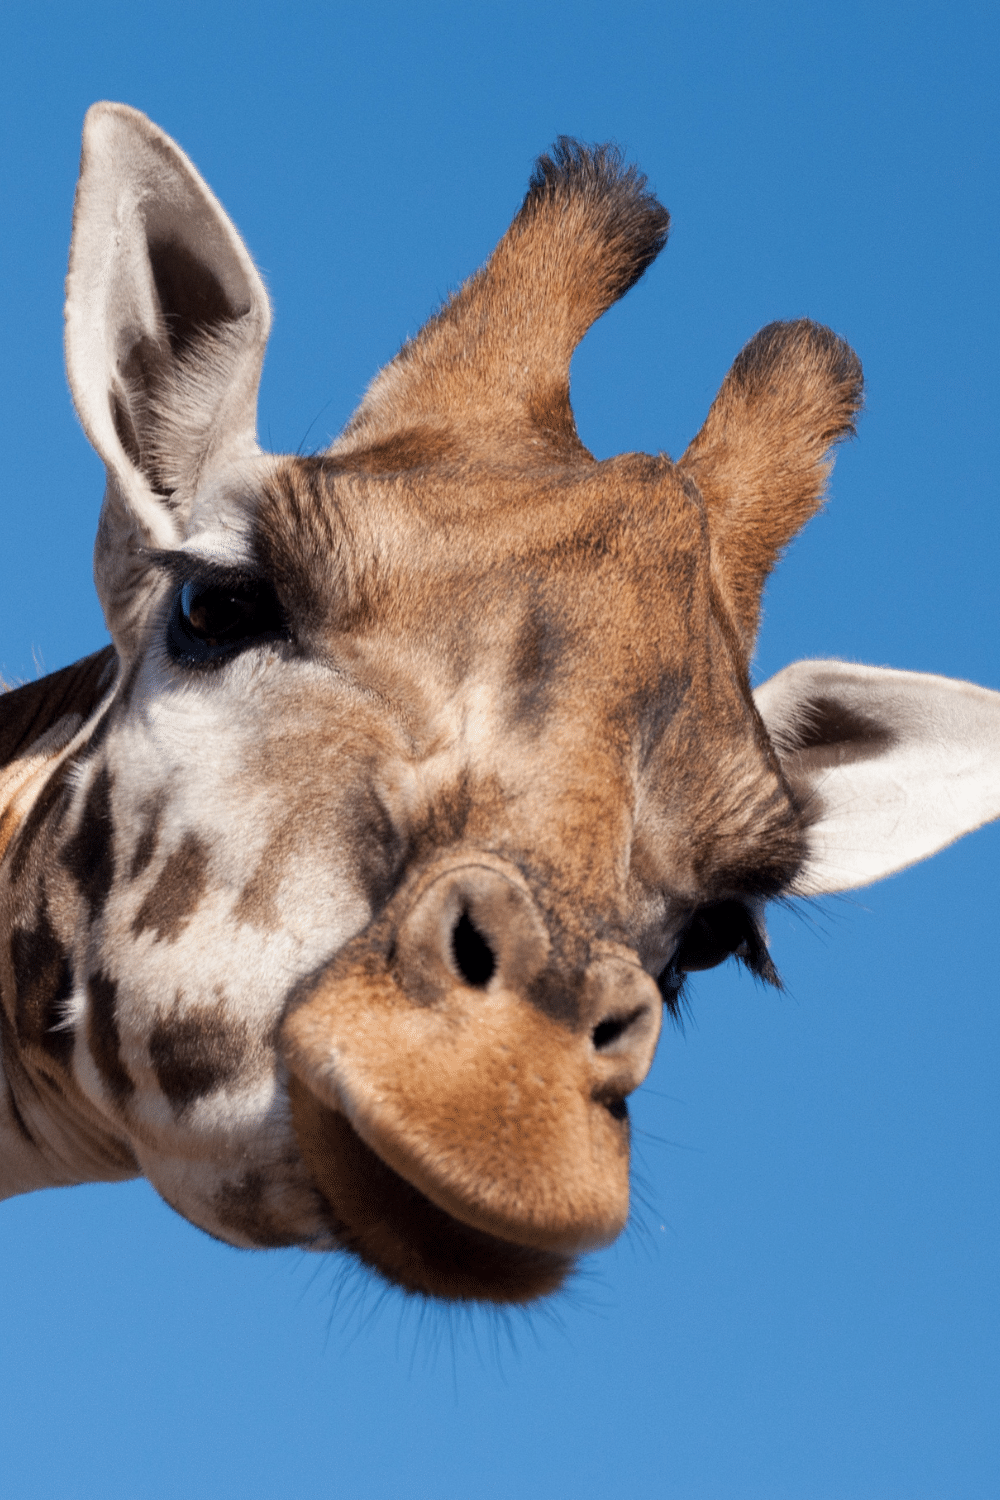 Close up photo of a giraffe's head with a clear blue sky in the background